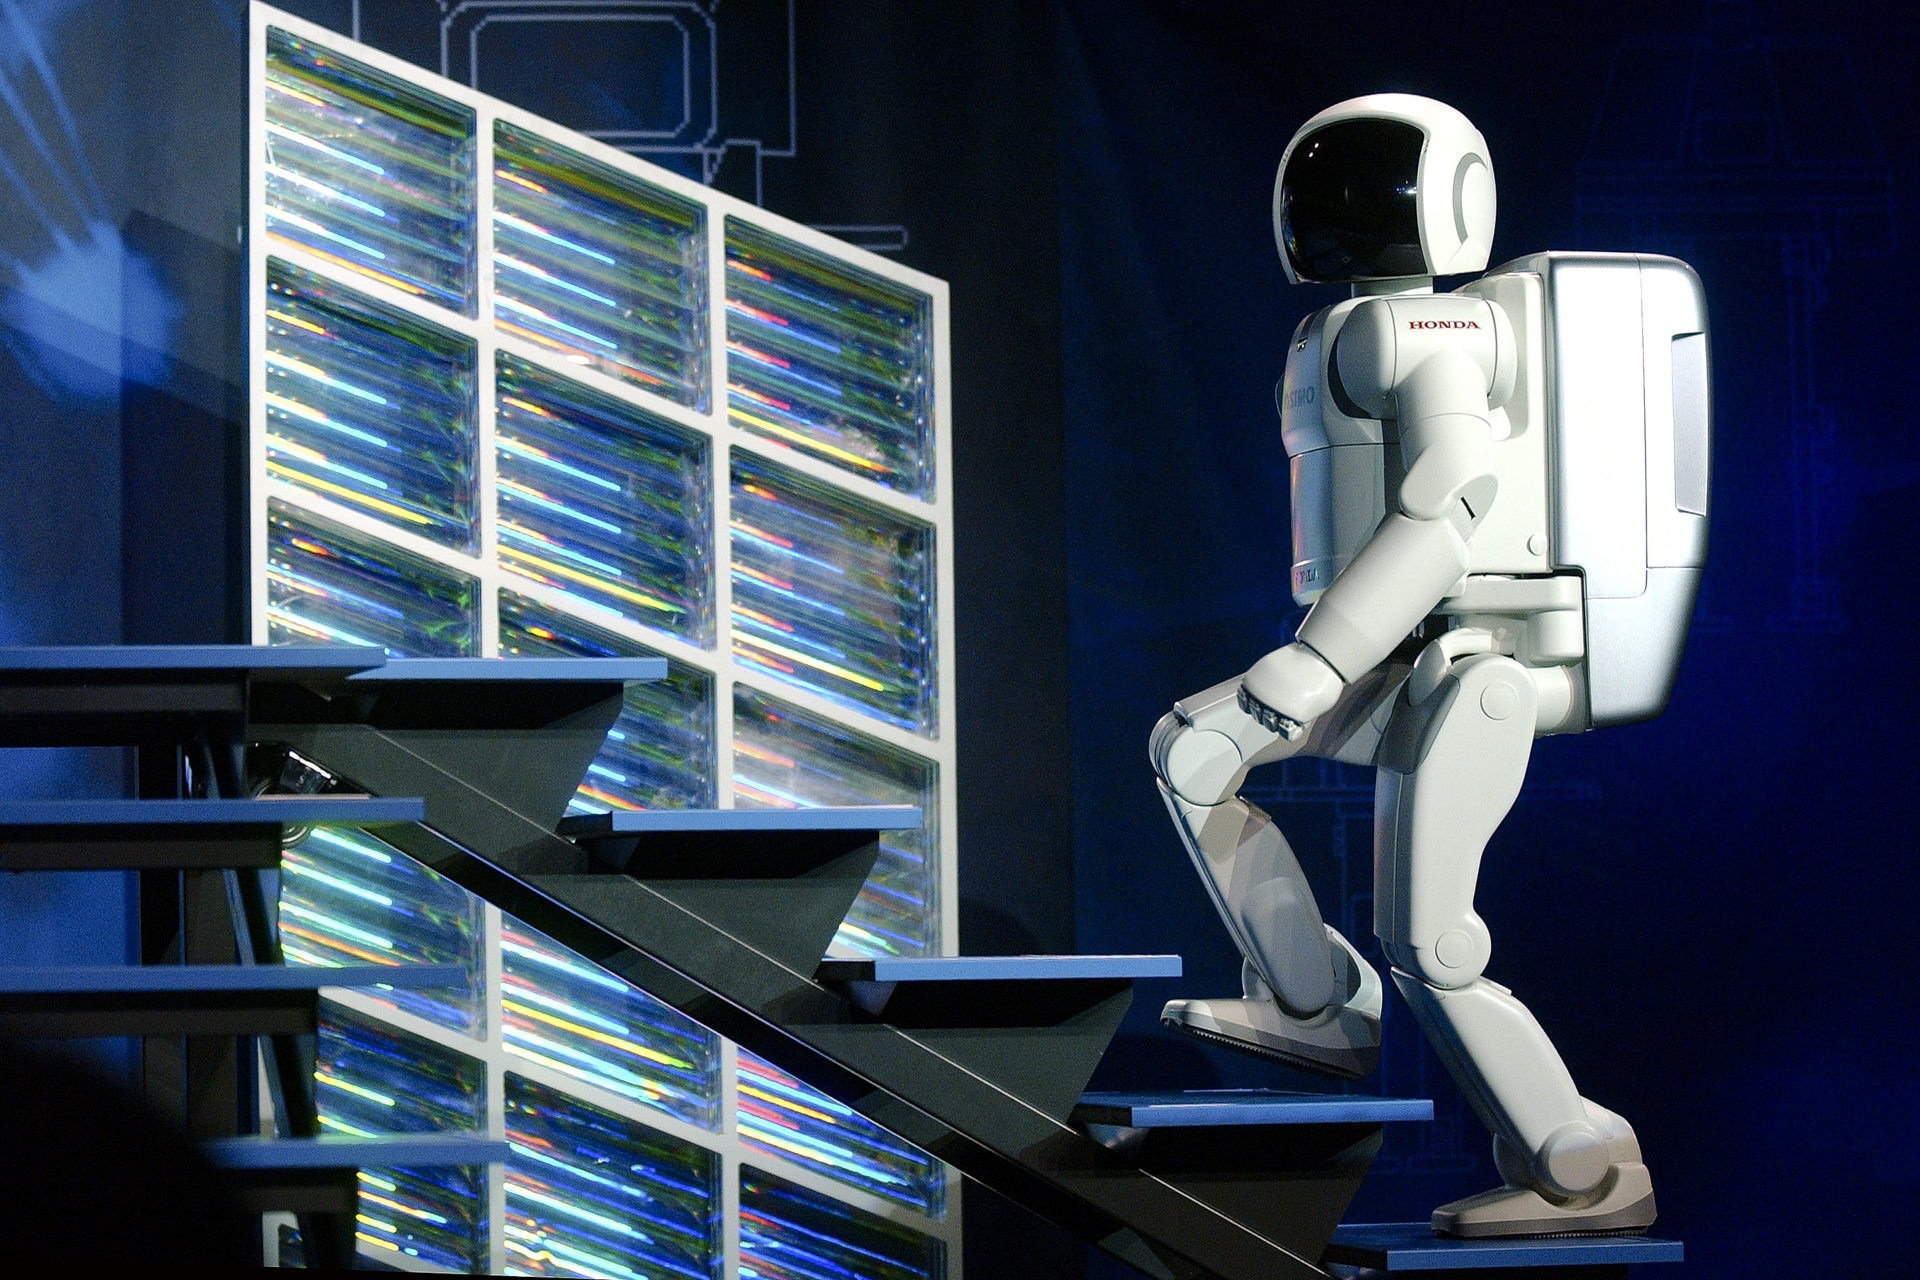 7 Asimo Bot Showed Off Its Skills, and When It Didn't Digital Trends